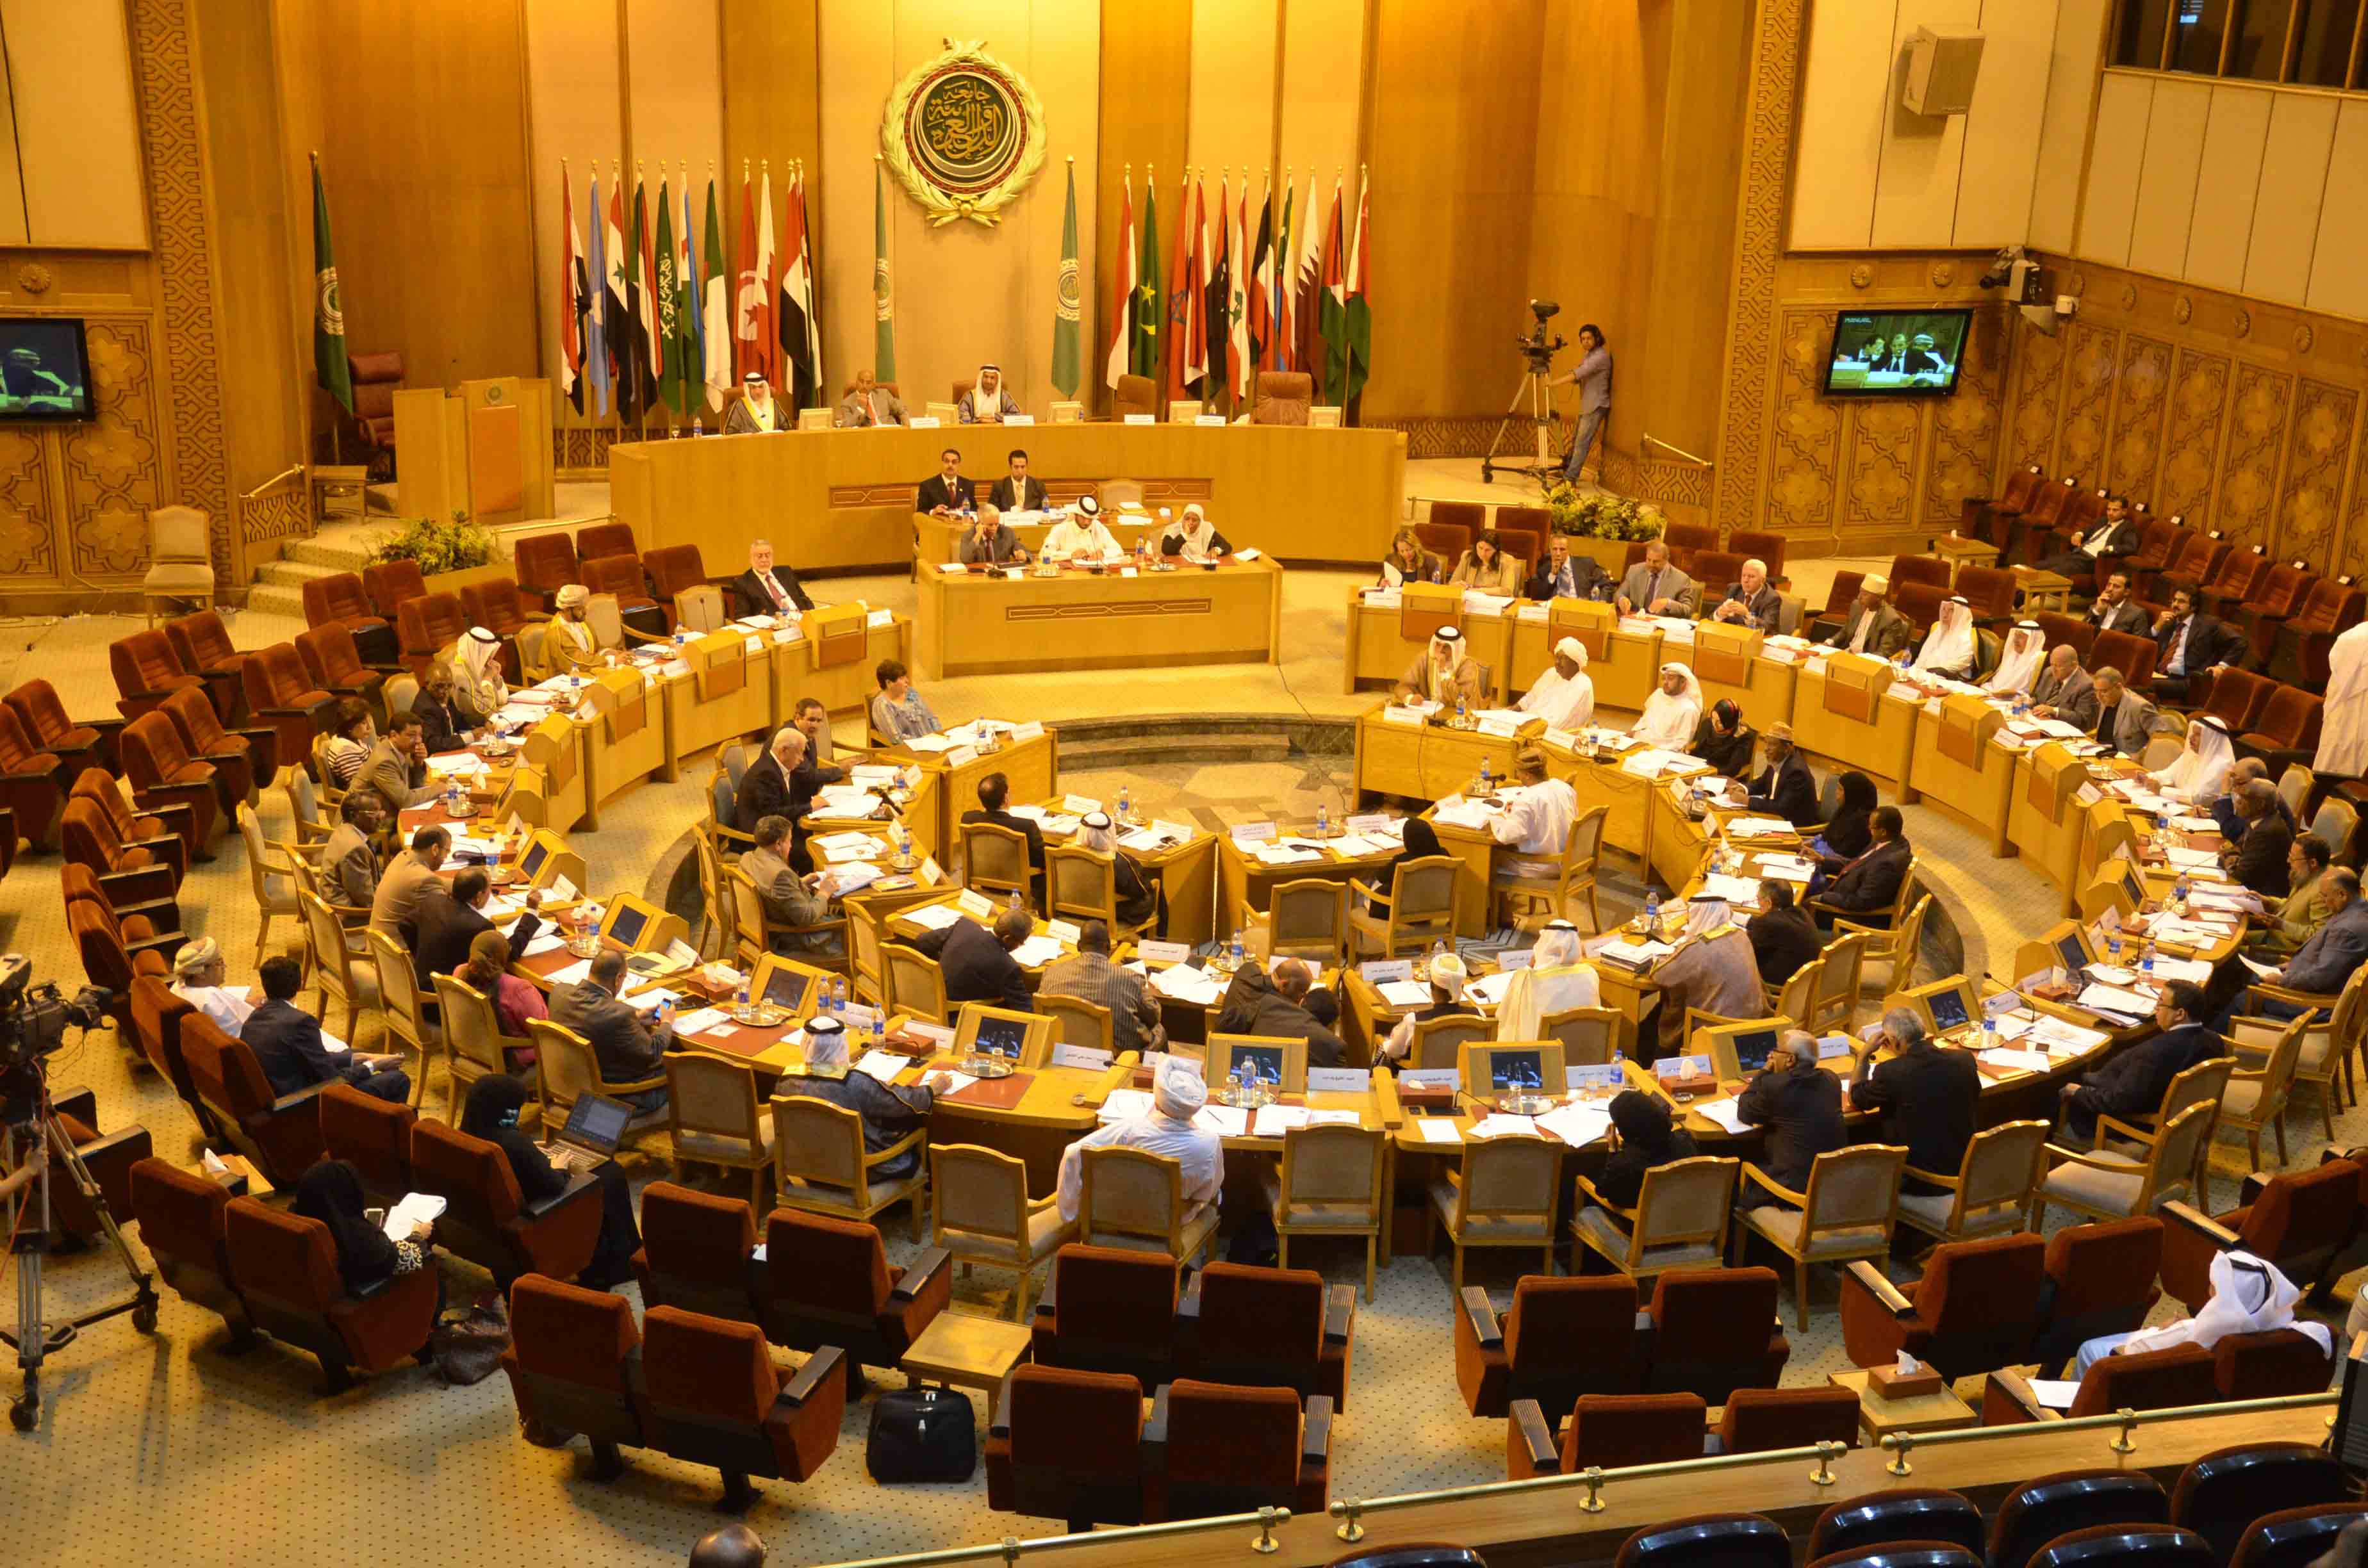 Arab parliament approves to block Israel's candidacy to UNSC